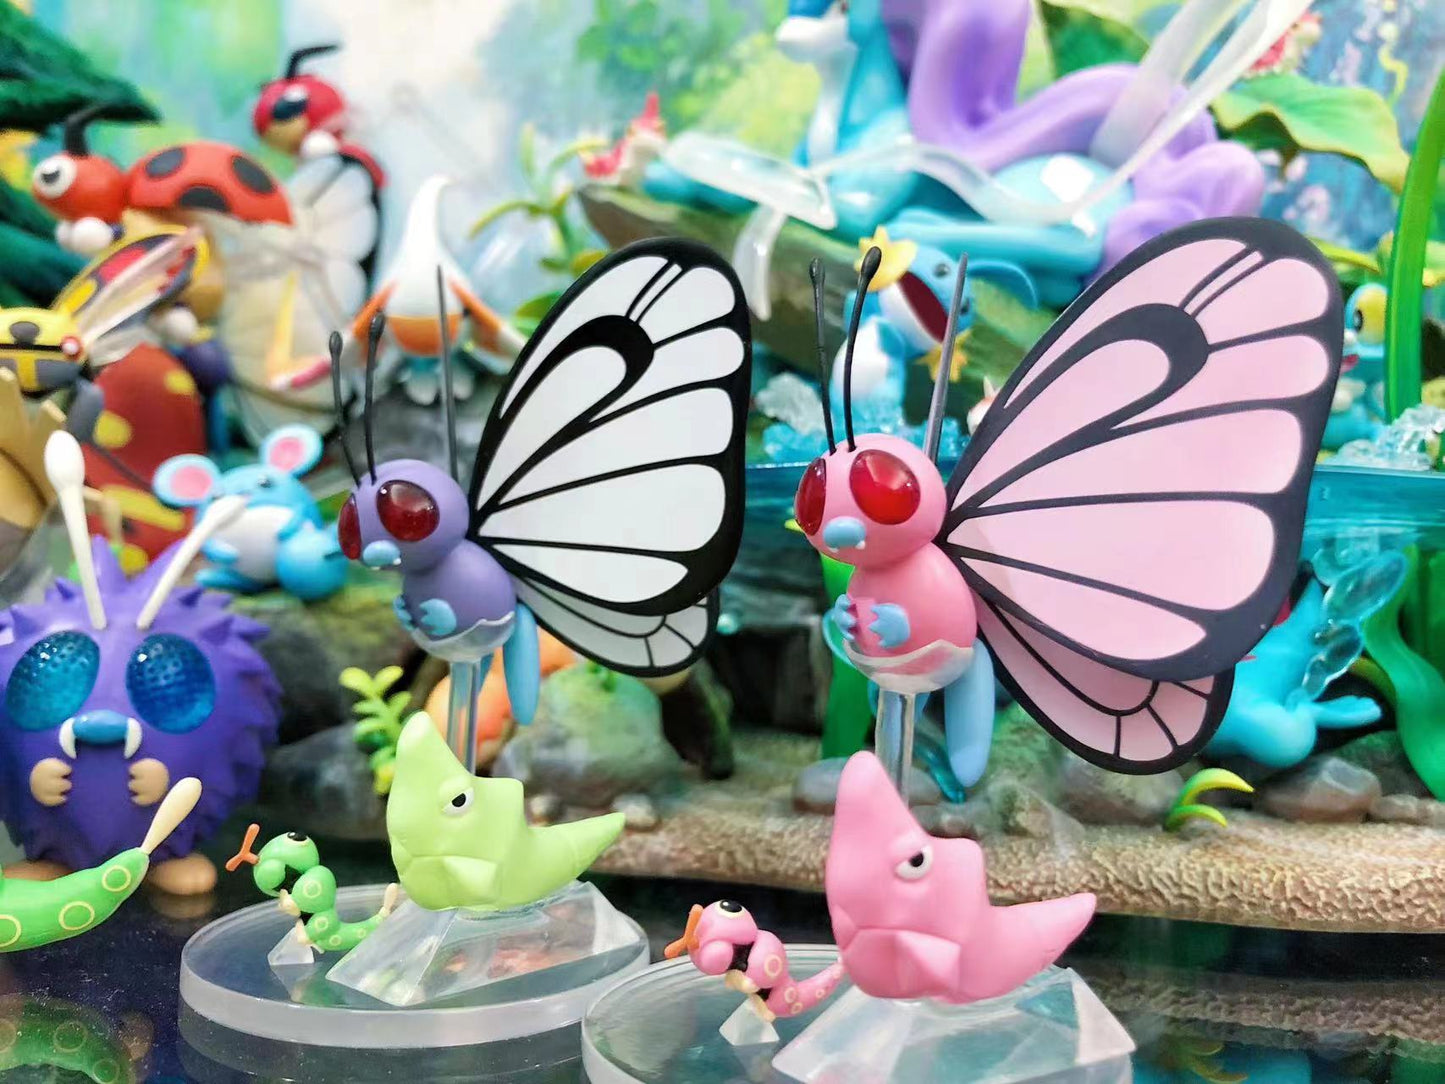 〖Sold Out〗Pokemon Scale World Caterpie Metapod Butterfree #010 #011 #012 1:20 - Star Studio